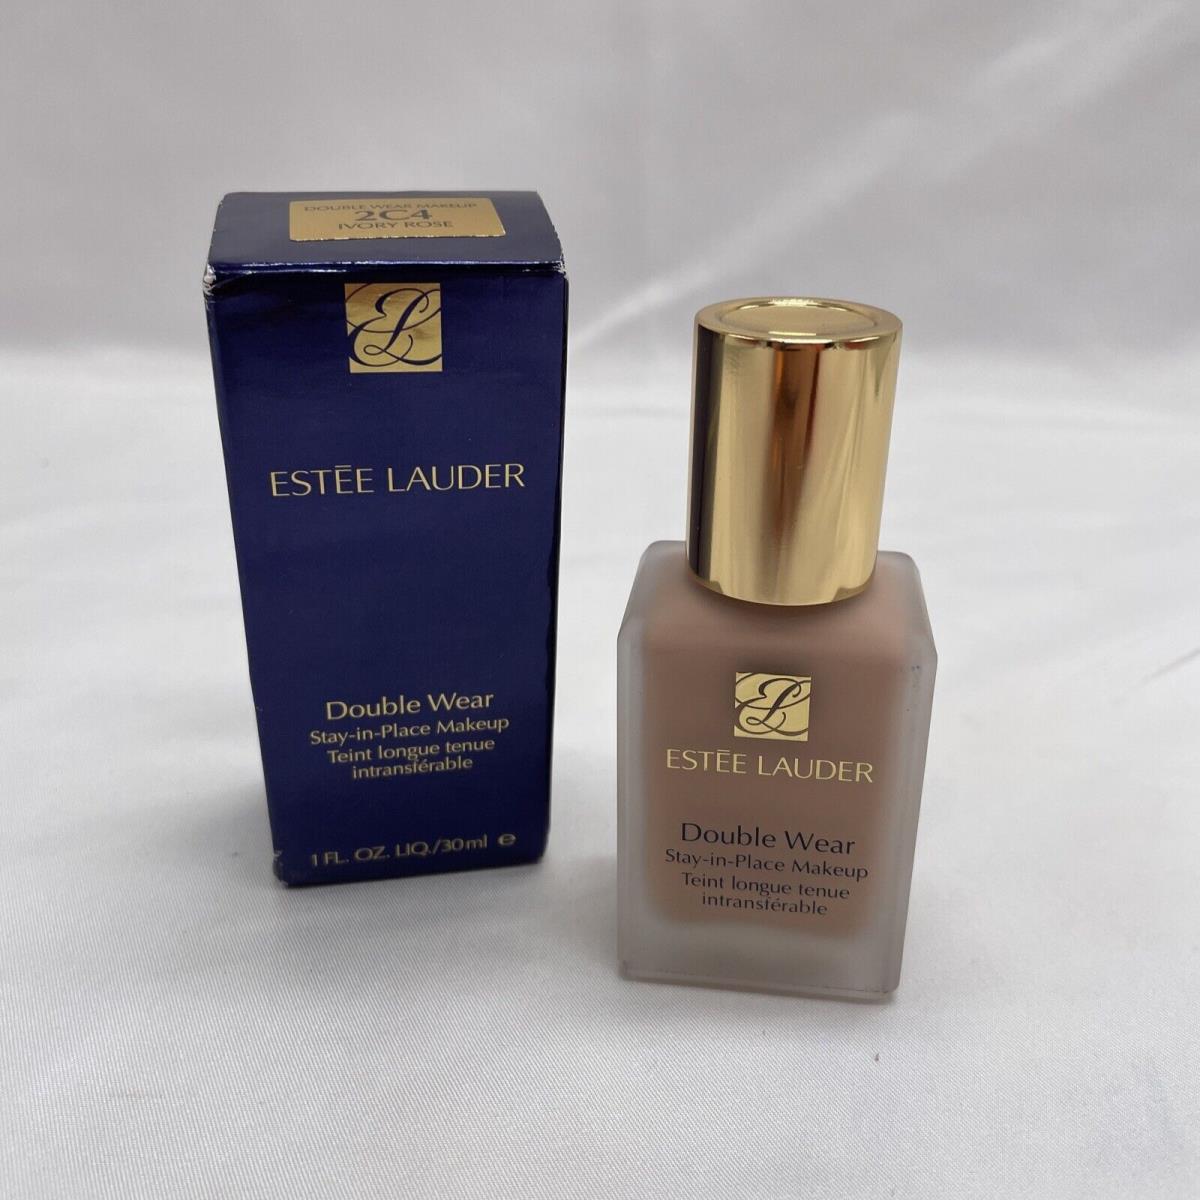 Estee Lauder Double Wear Stay-in-place Makeup Foundation - Choose Shade 1OZ/30ML 2C4 Ivory Rose